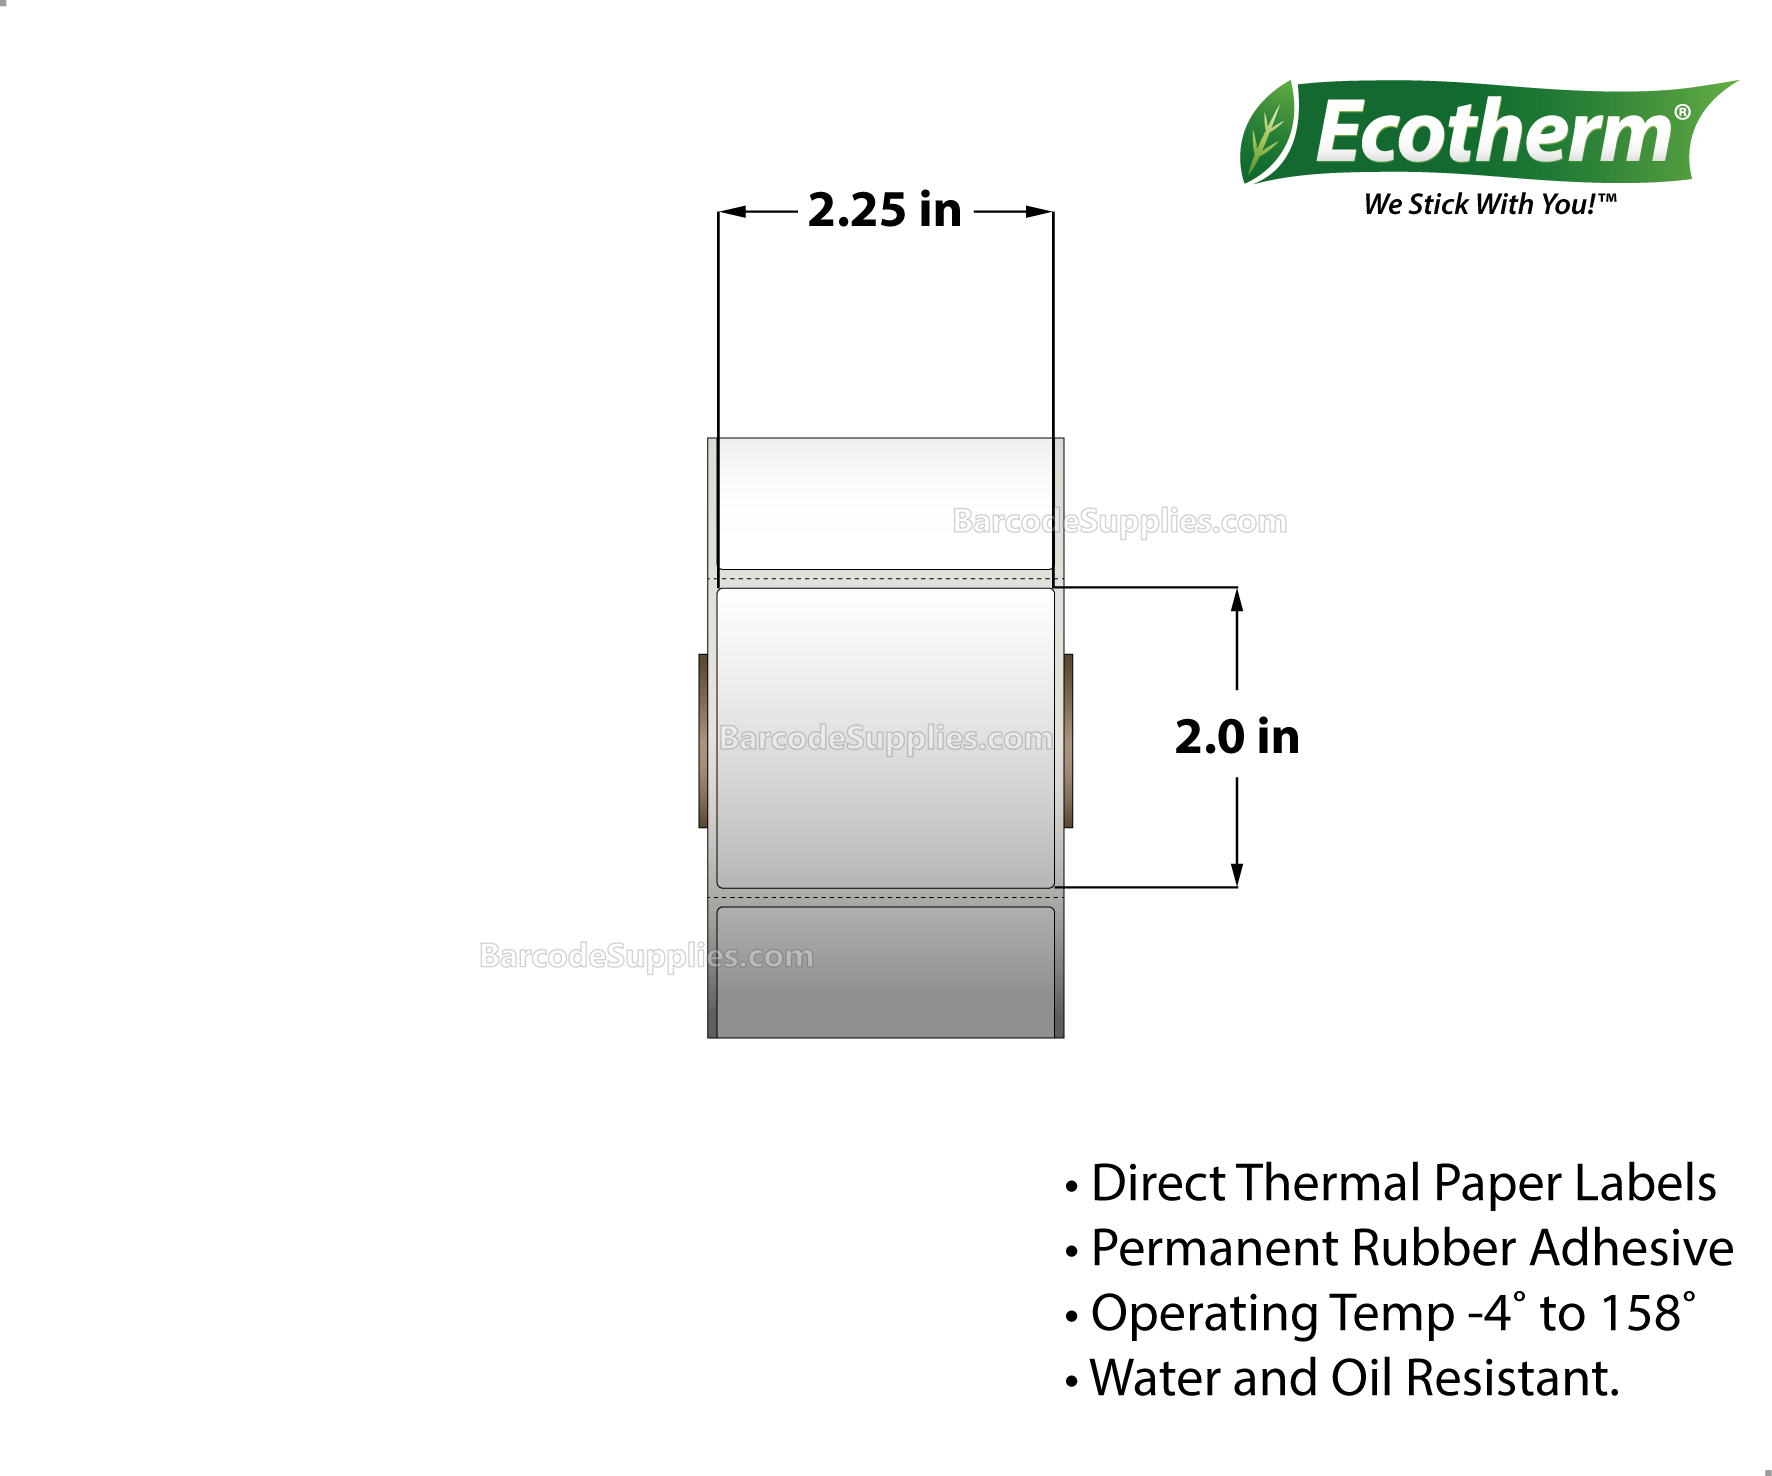 2.25 x 2 Direct Thermal White Labels With Rubber Adhesive - Perforated - 735 Labels Per Roll - Carton Of 4 Rolls - 2940 Labels Total - MPN: ECOTHERM14104-4